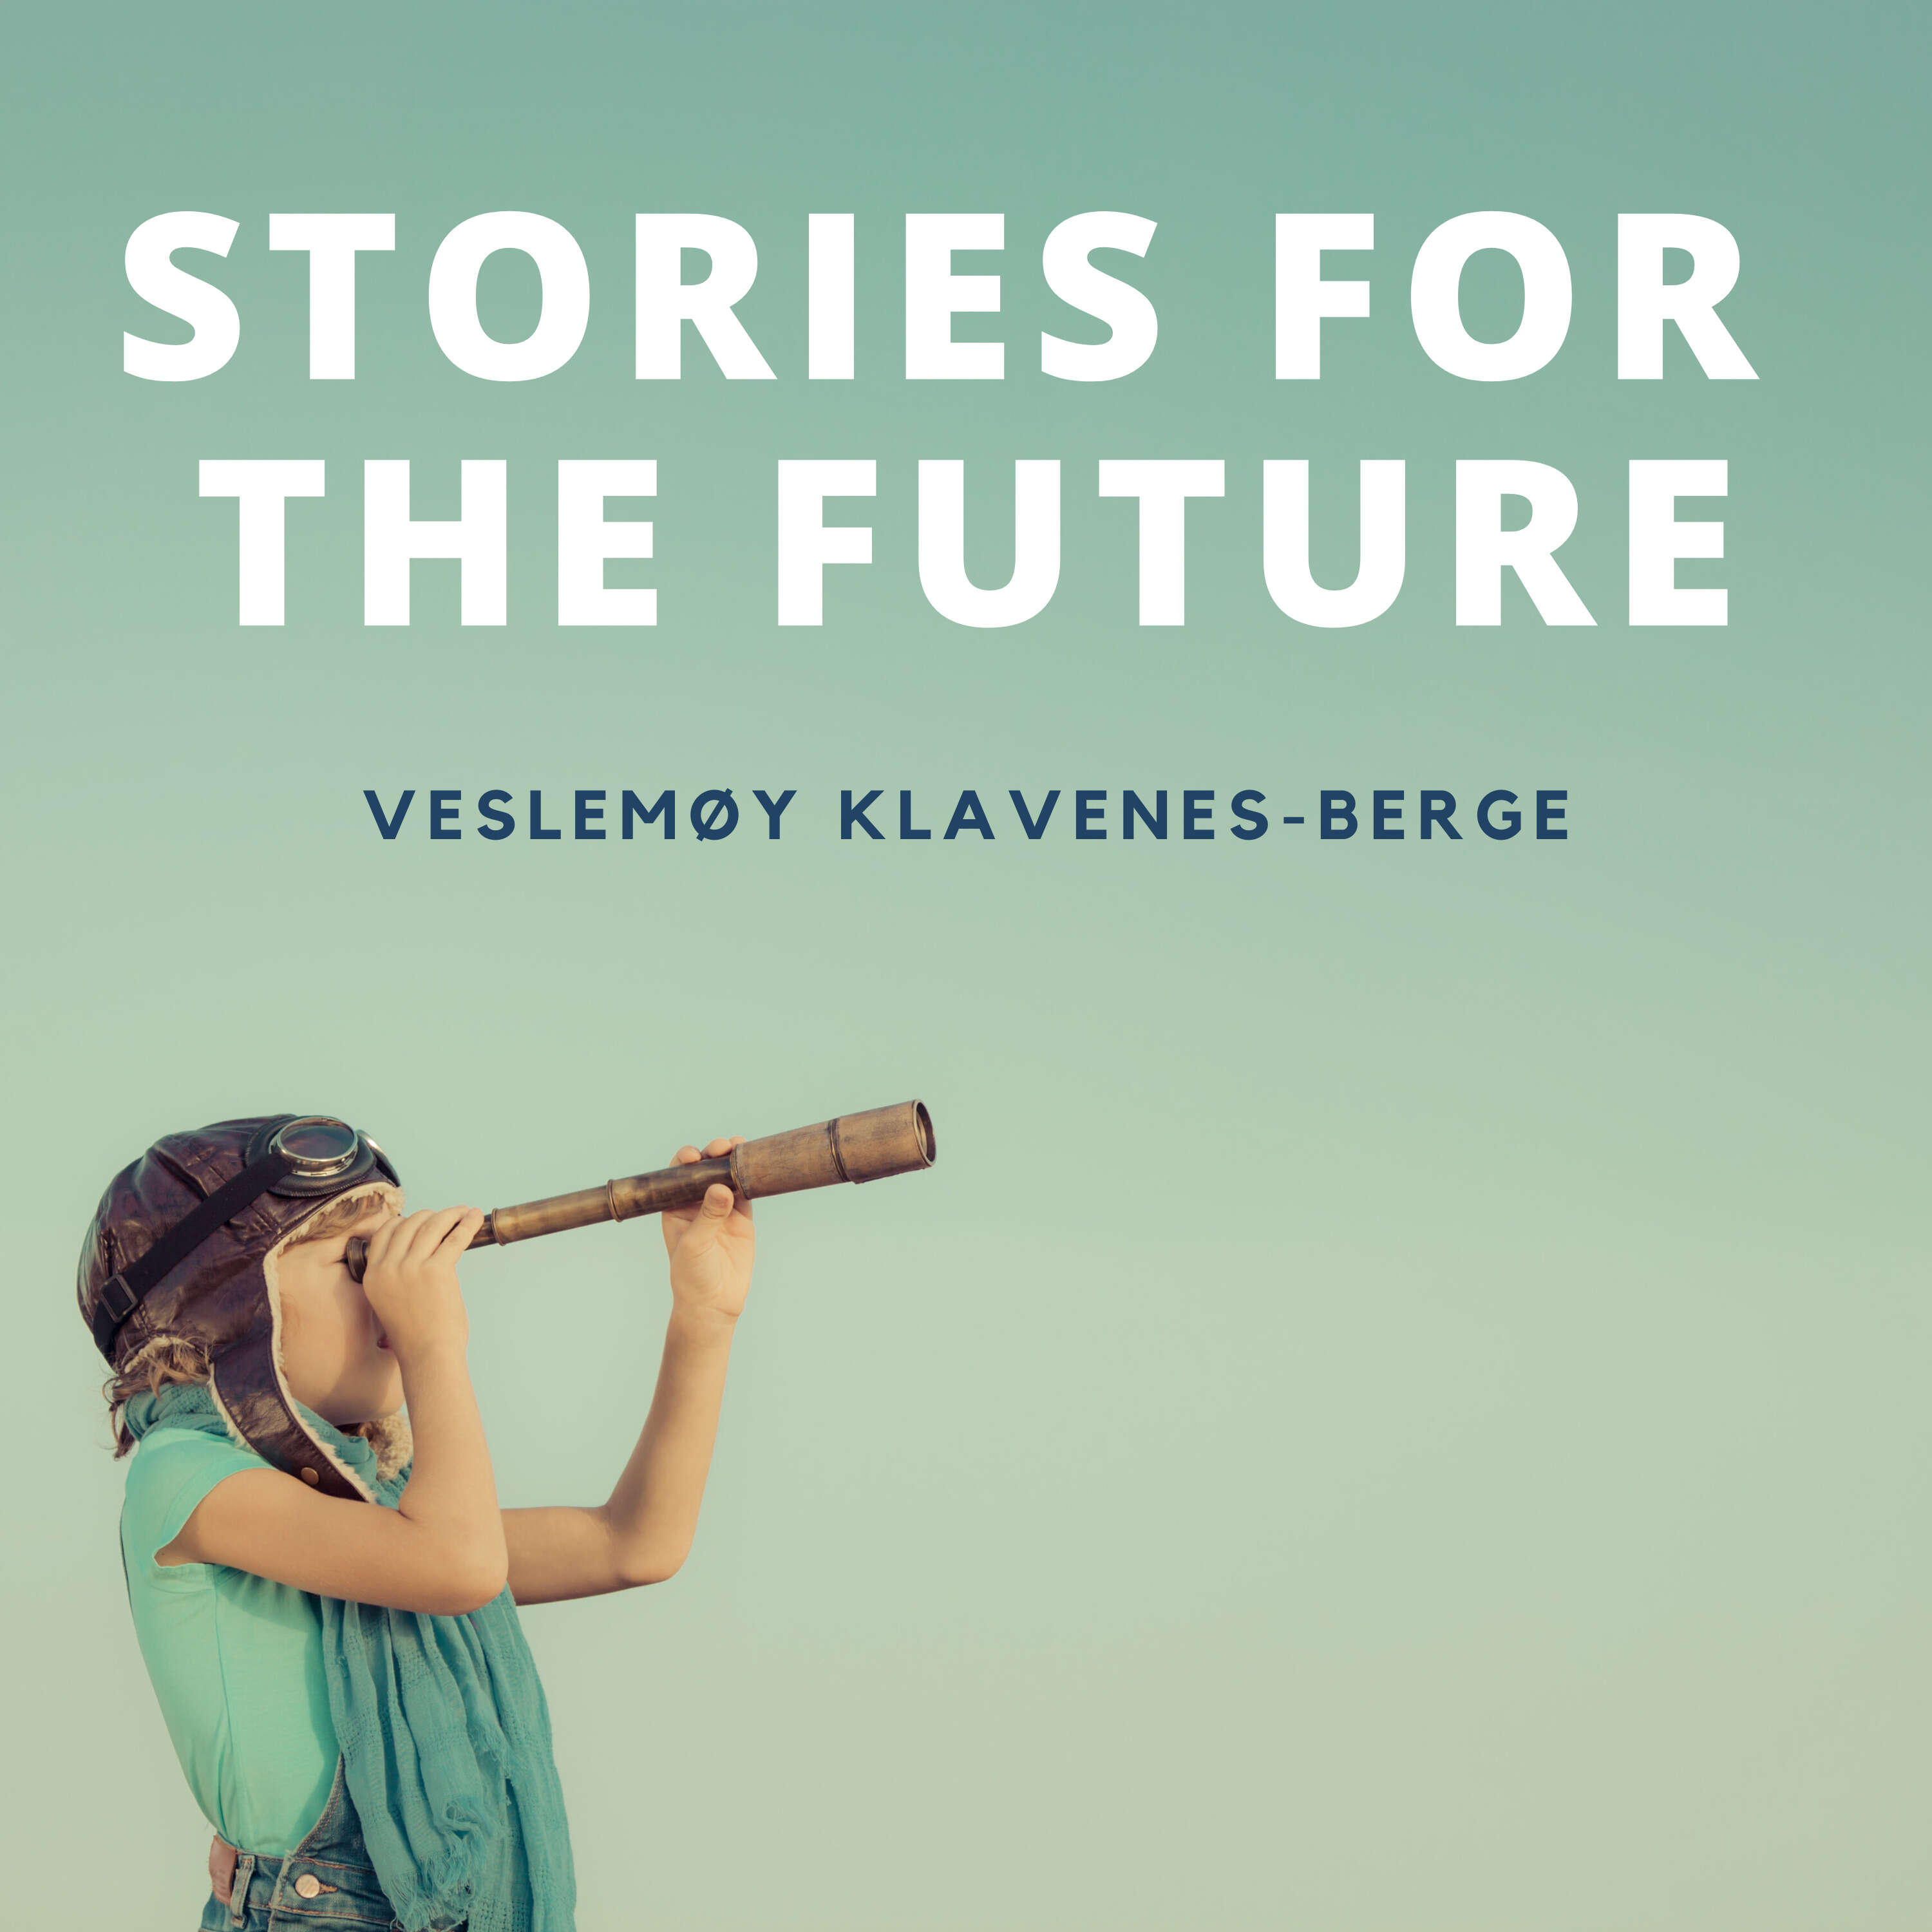 Artwork for Stories for the future